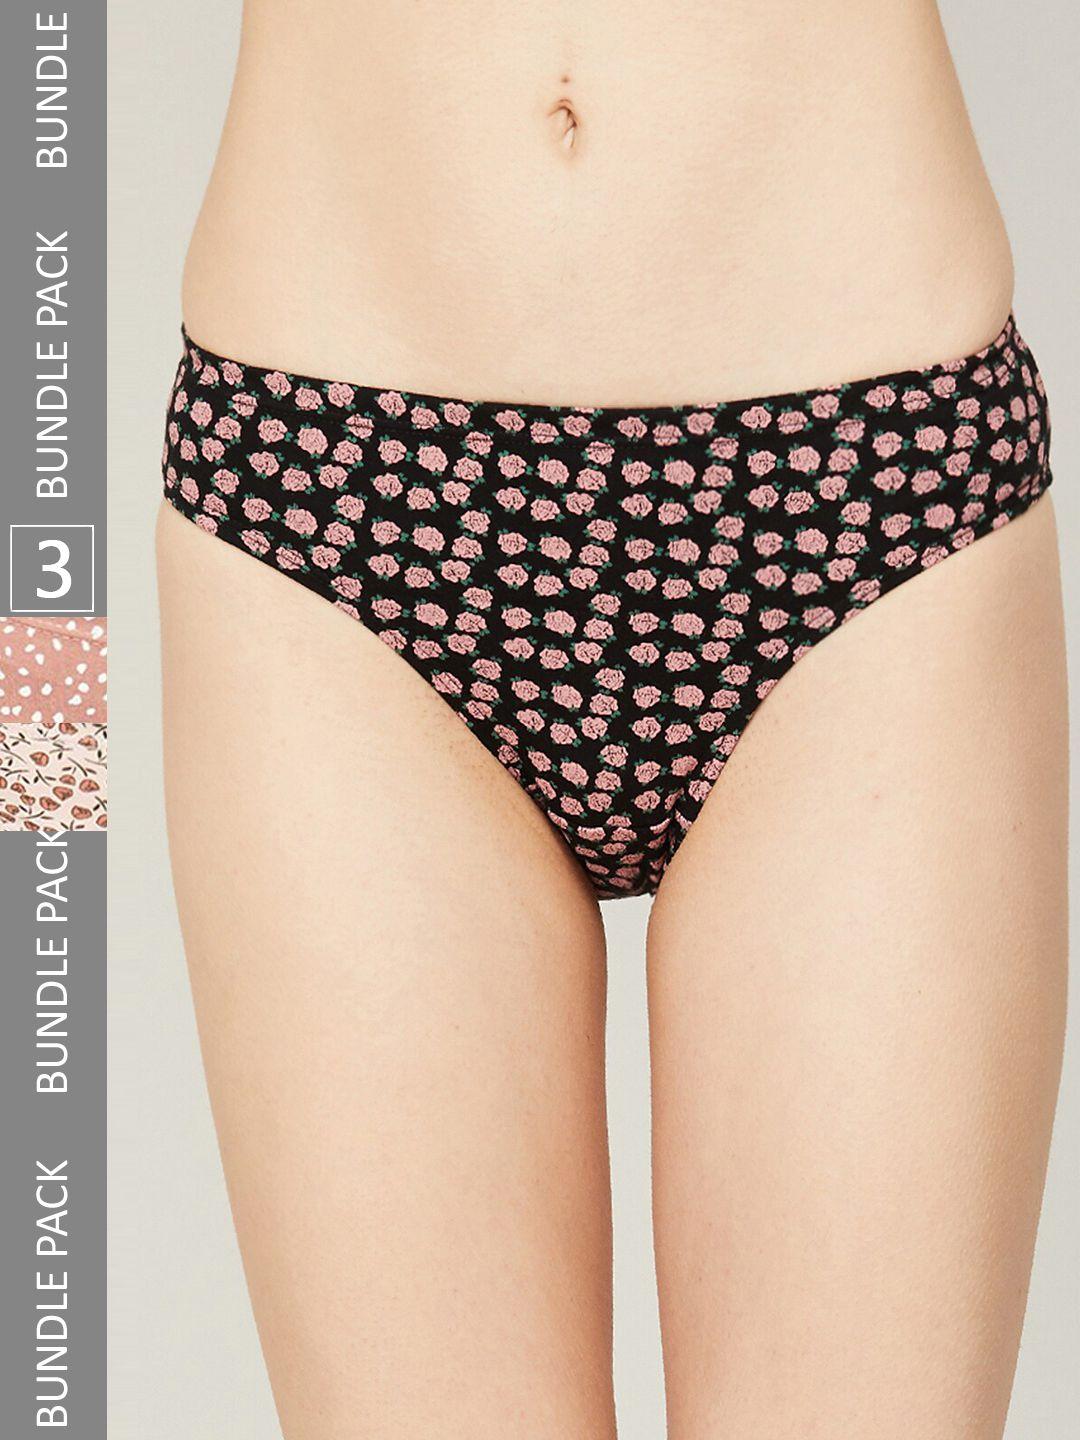 ginger by lifestyle pack of 3 printed cotton briefs